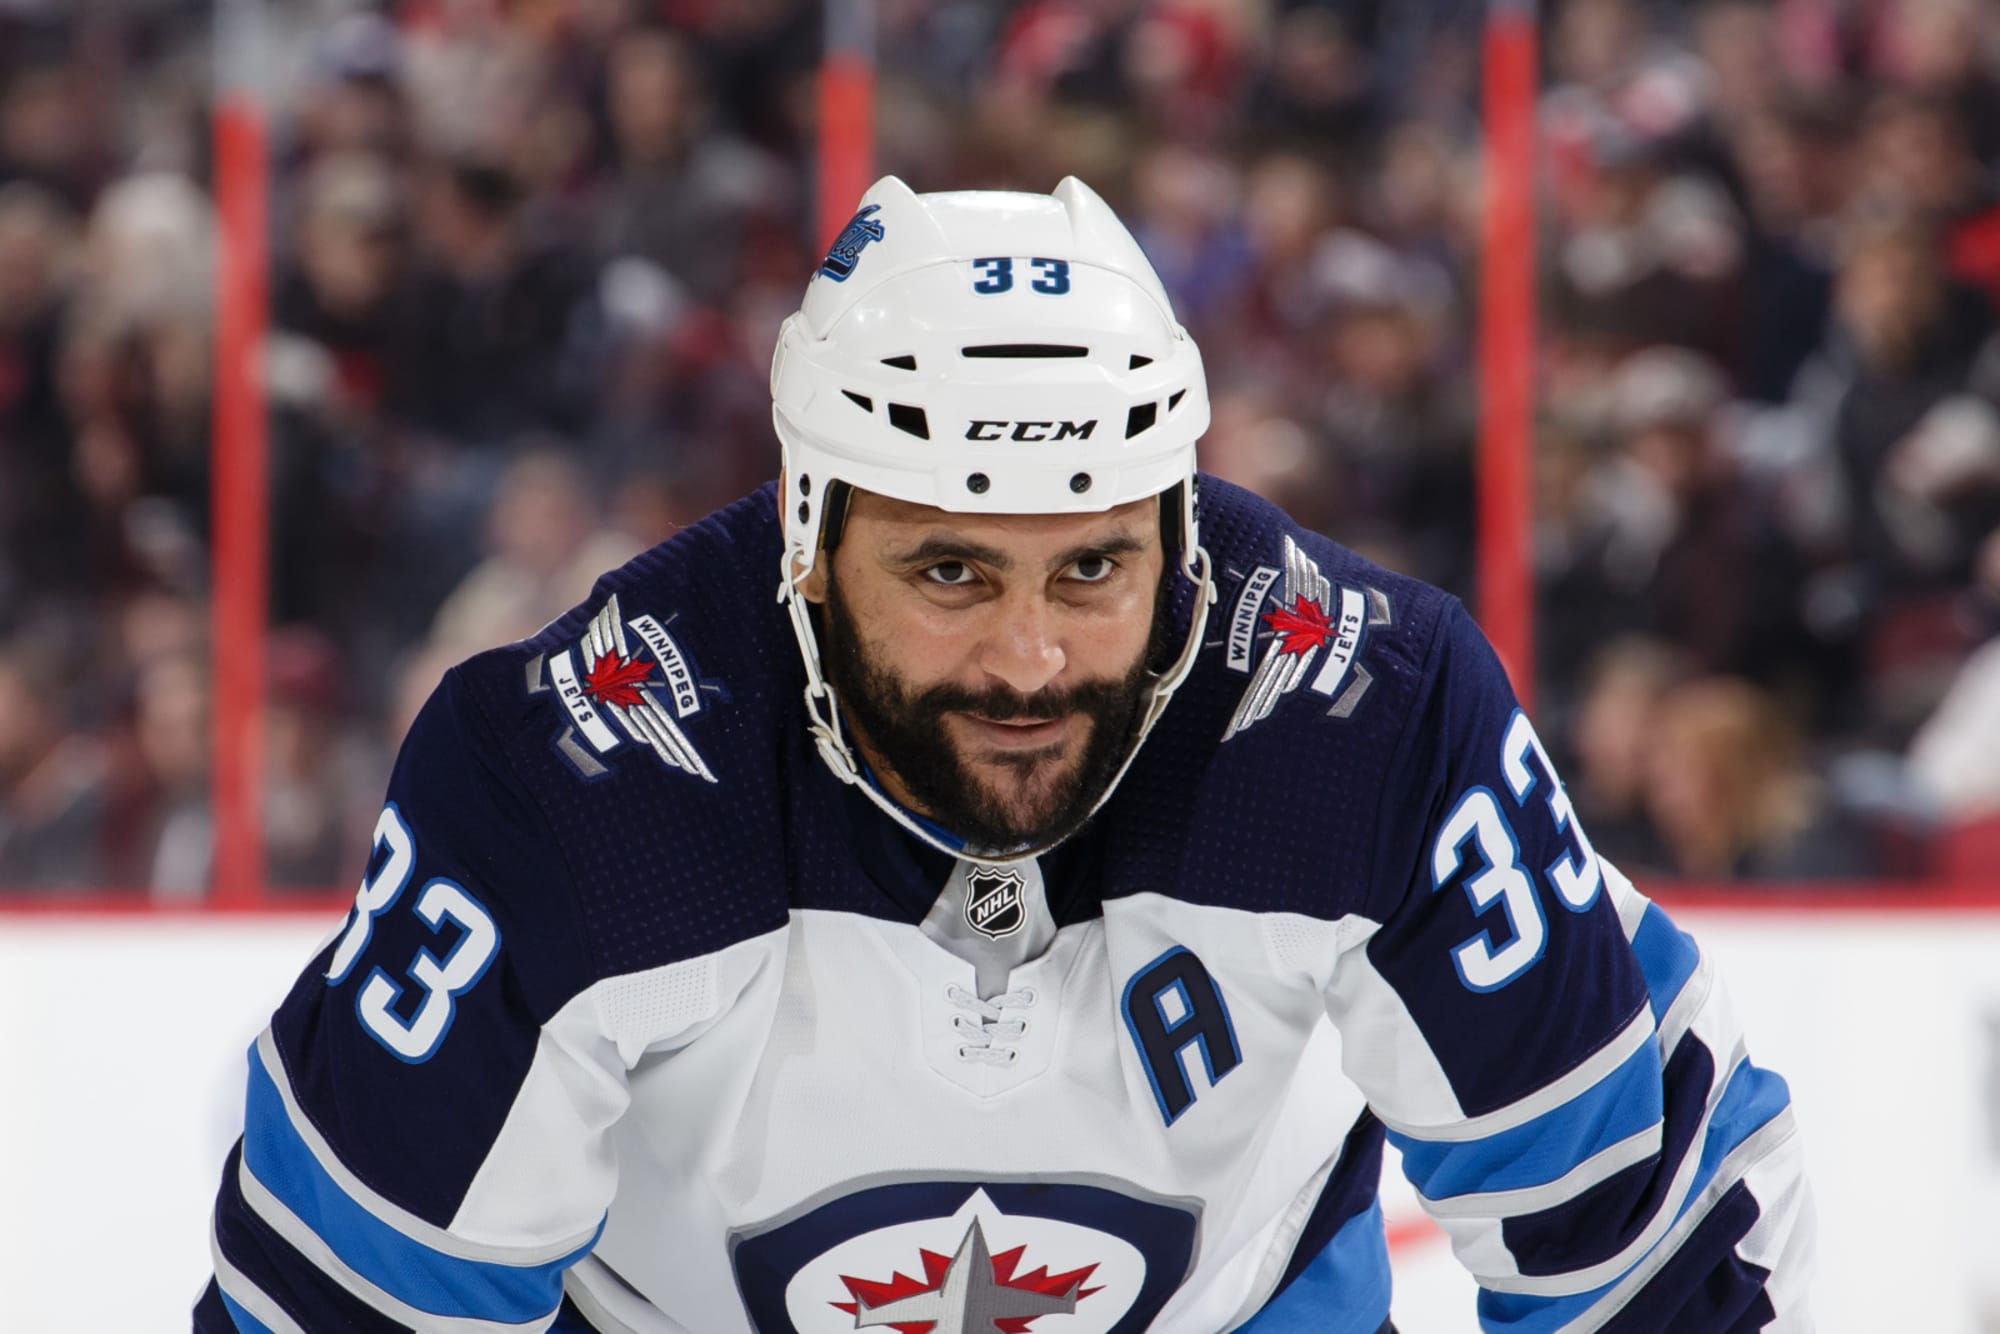 Dustin Byfuglien and Jets appear to be heading toward a split. Has